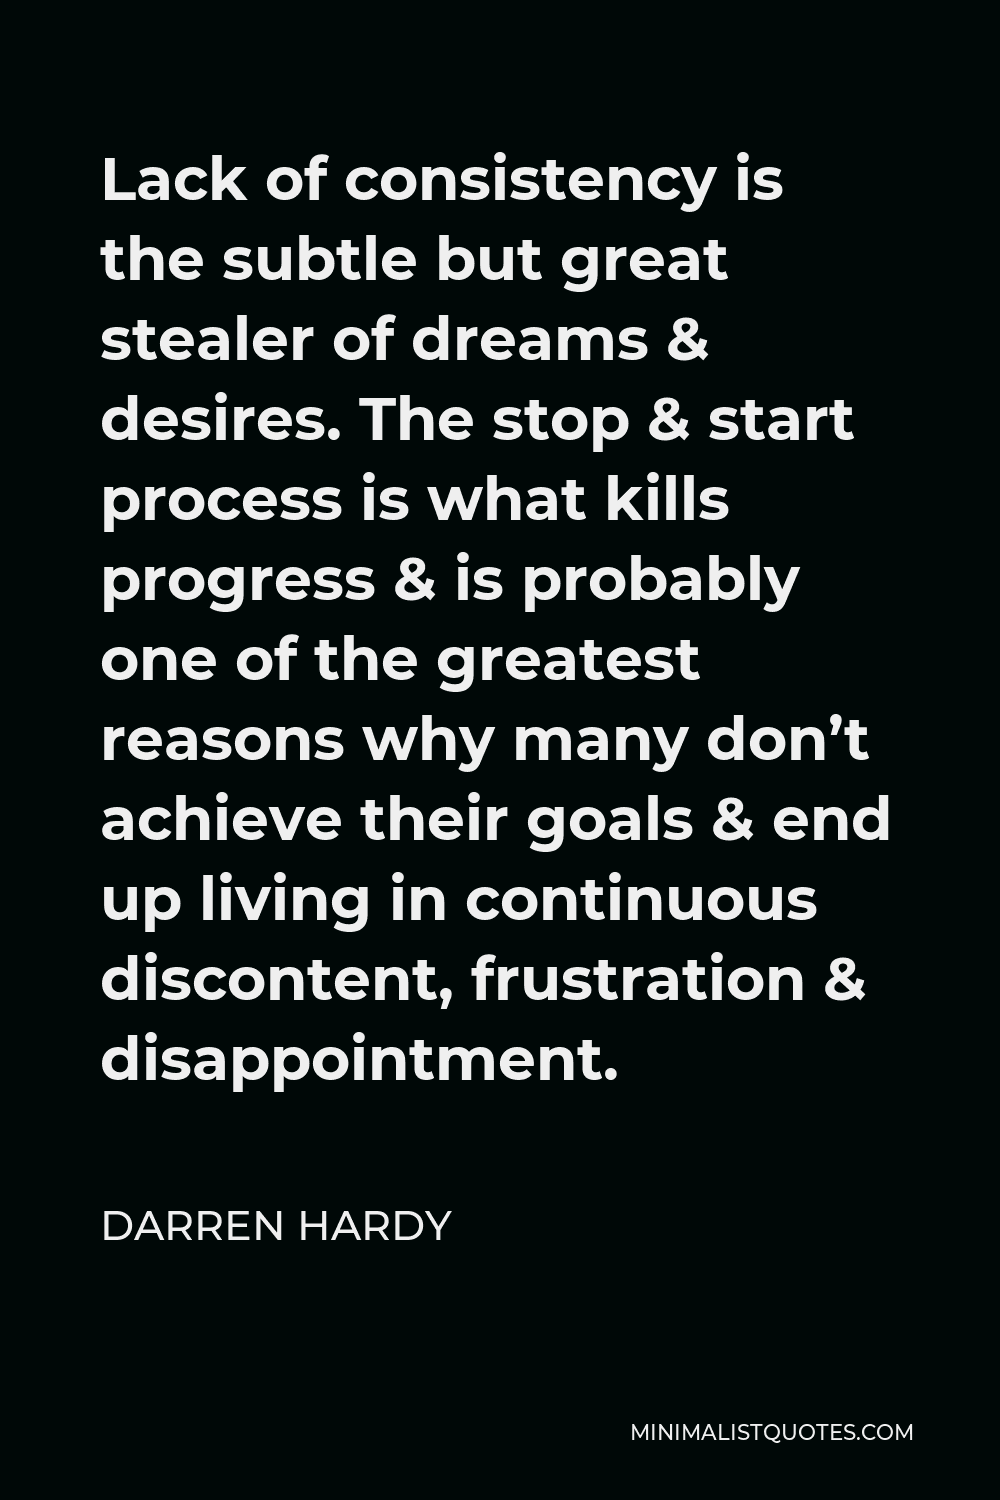 Darren Hardy Quote - Lack of consistency is the subtle but great stealer of dreams & desires. The stop & start process is what kills progress & is probably one of the greatest reasons why many don’t achieve their goals & end up living in continuous discontent, frustration & disappointment.